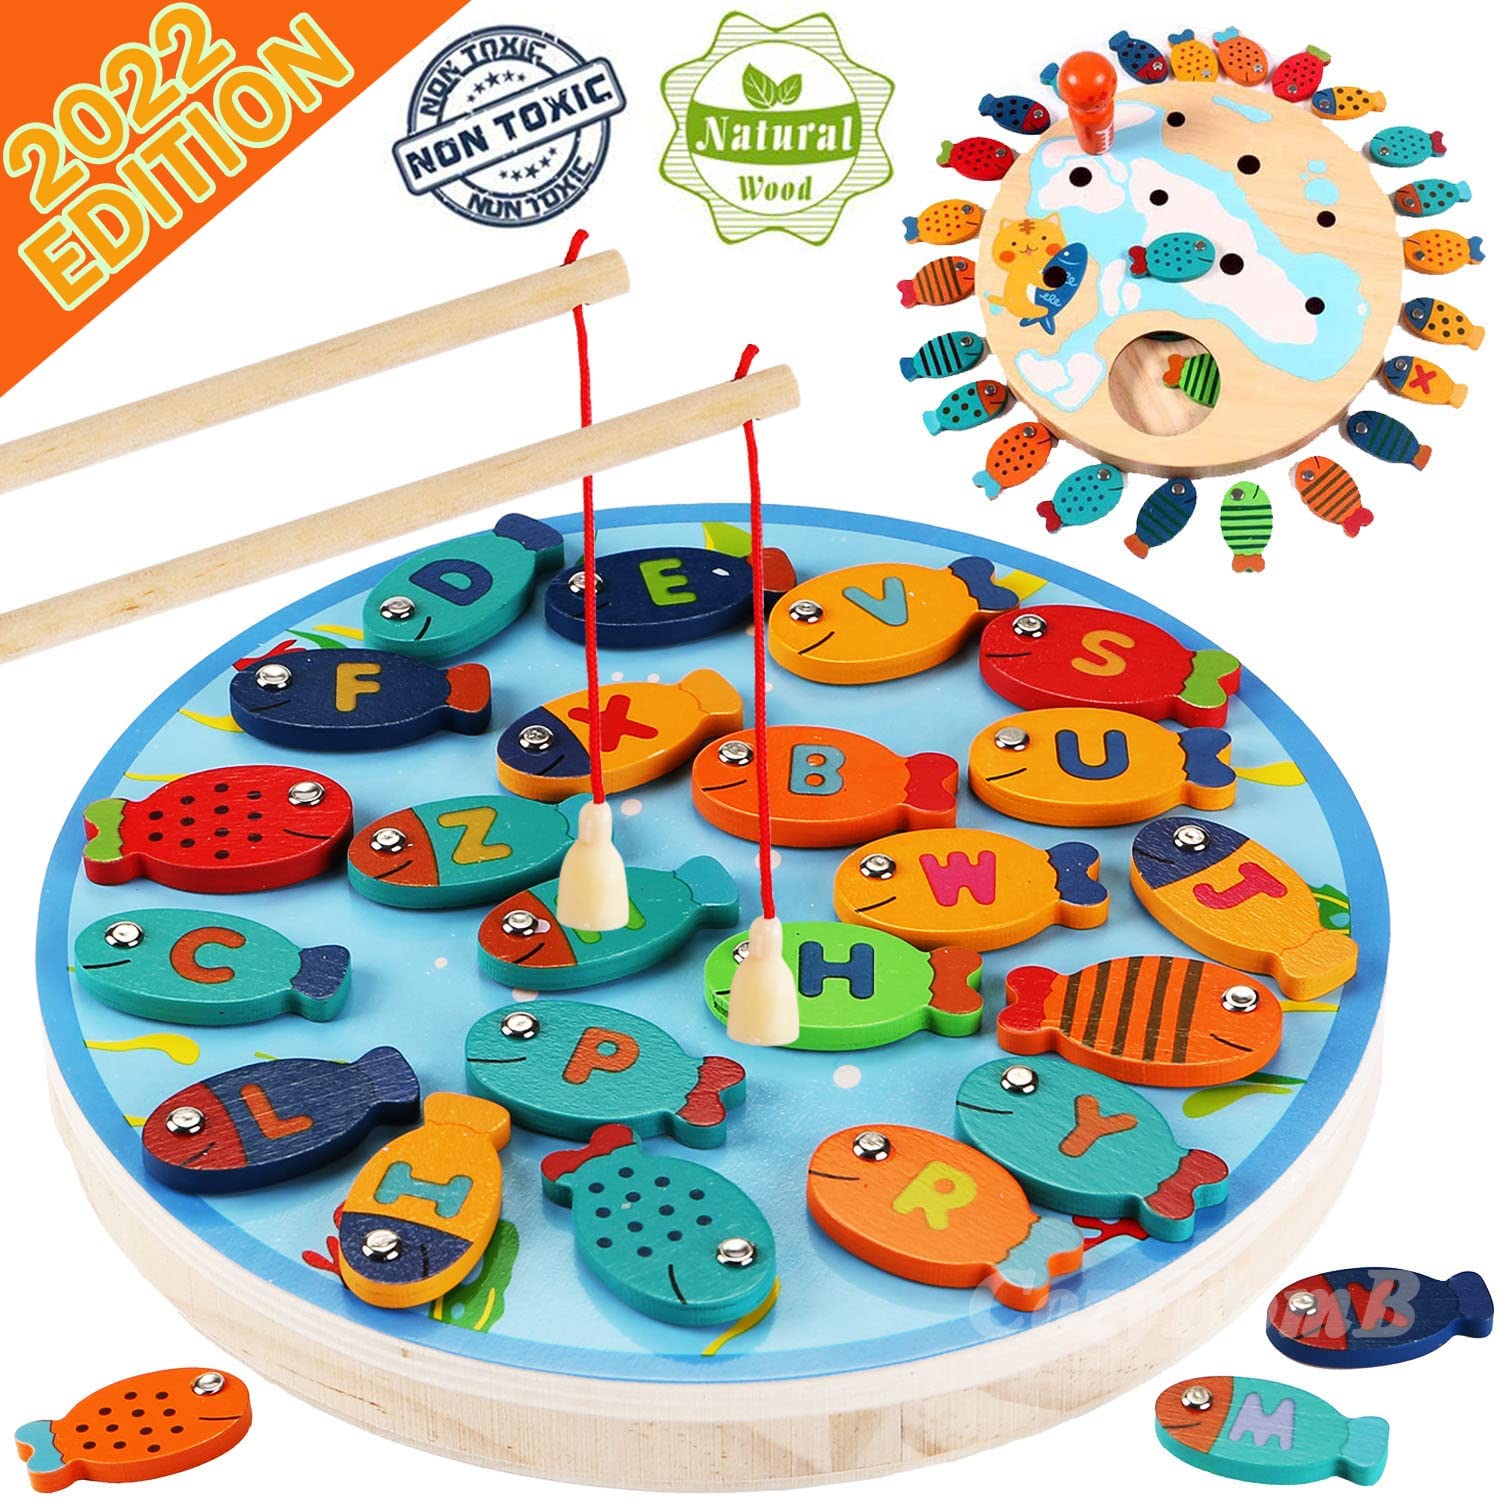 Baby Products Online - CozyBomB Magnetic Fishing Game for Kids - Pool Toys  for Water Table Bathtub Learning Learning Fishin's Bath Fun Fun with 4  Squeaks Rubber Animal and Boat, Fish Rod